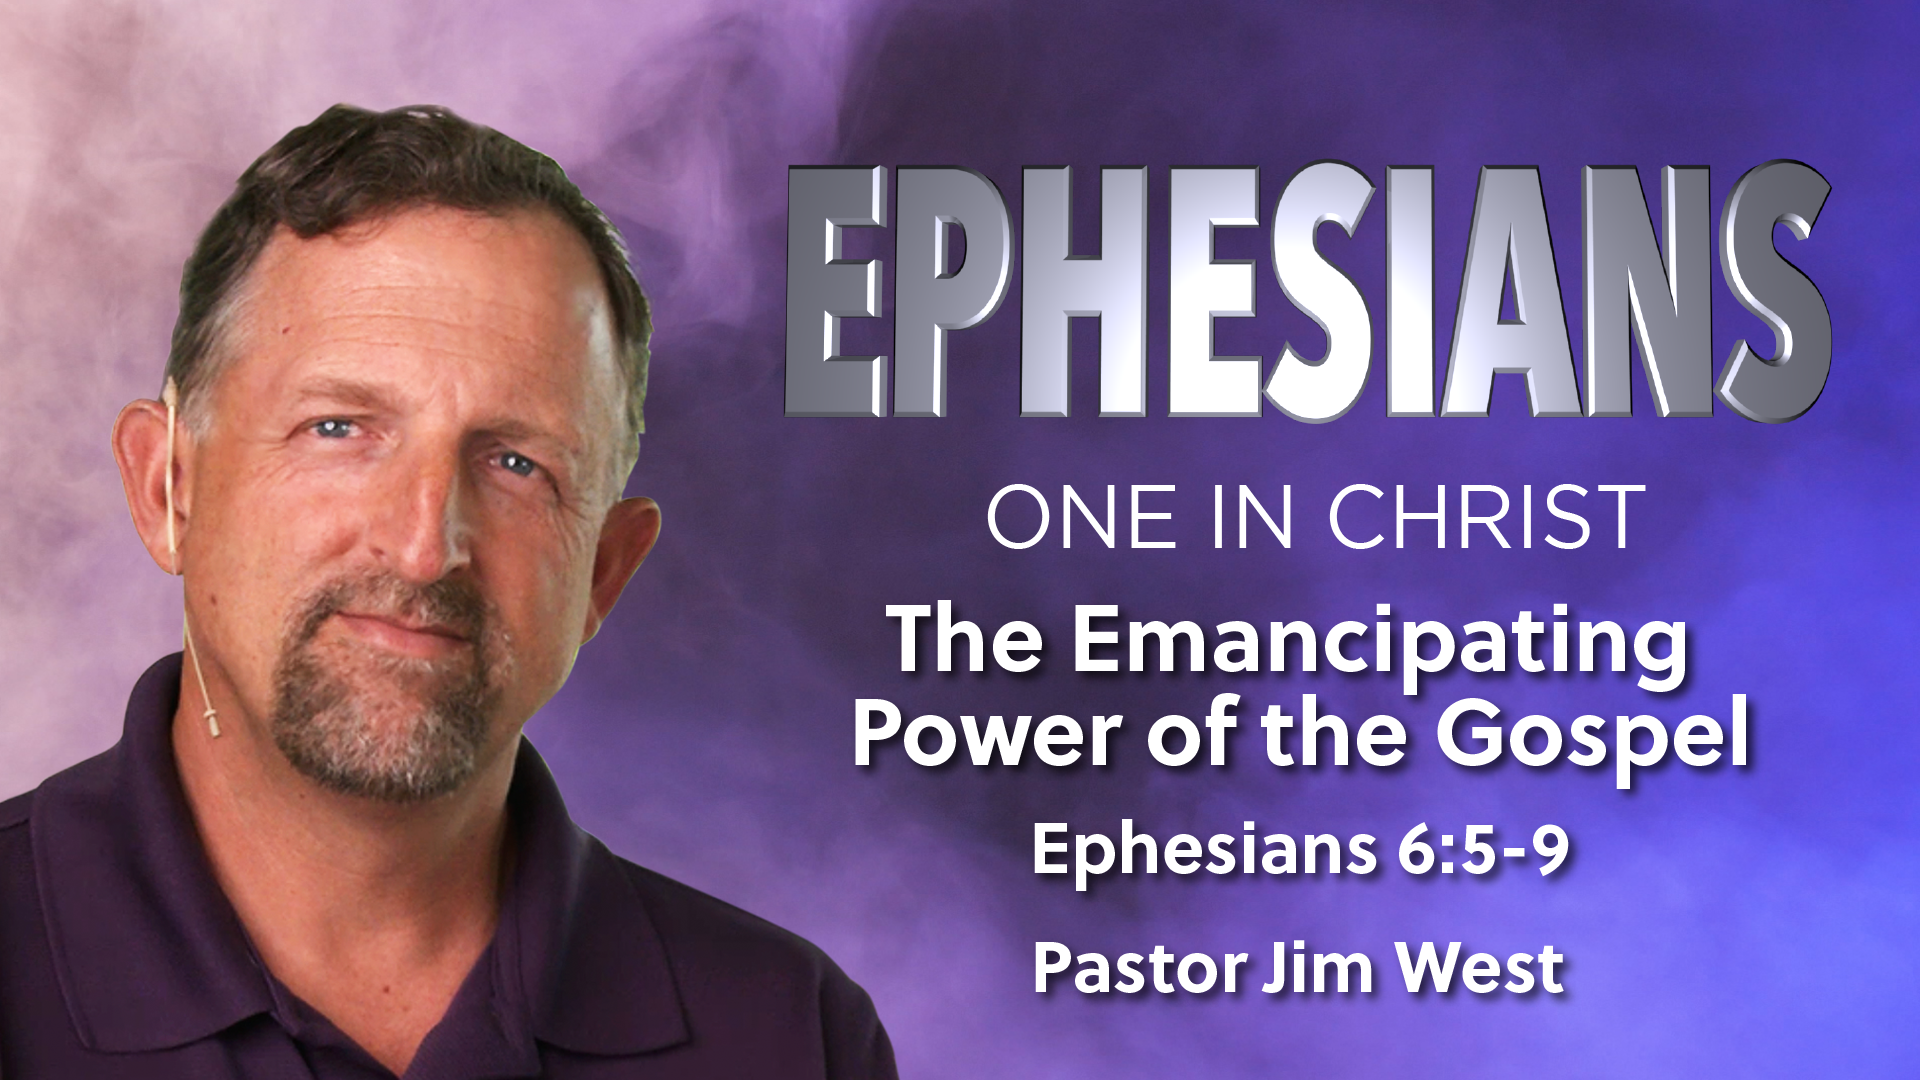 The Emancipating Power of the Gospel